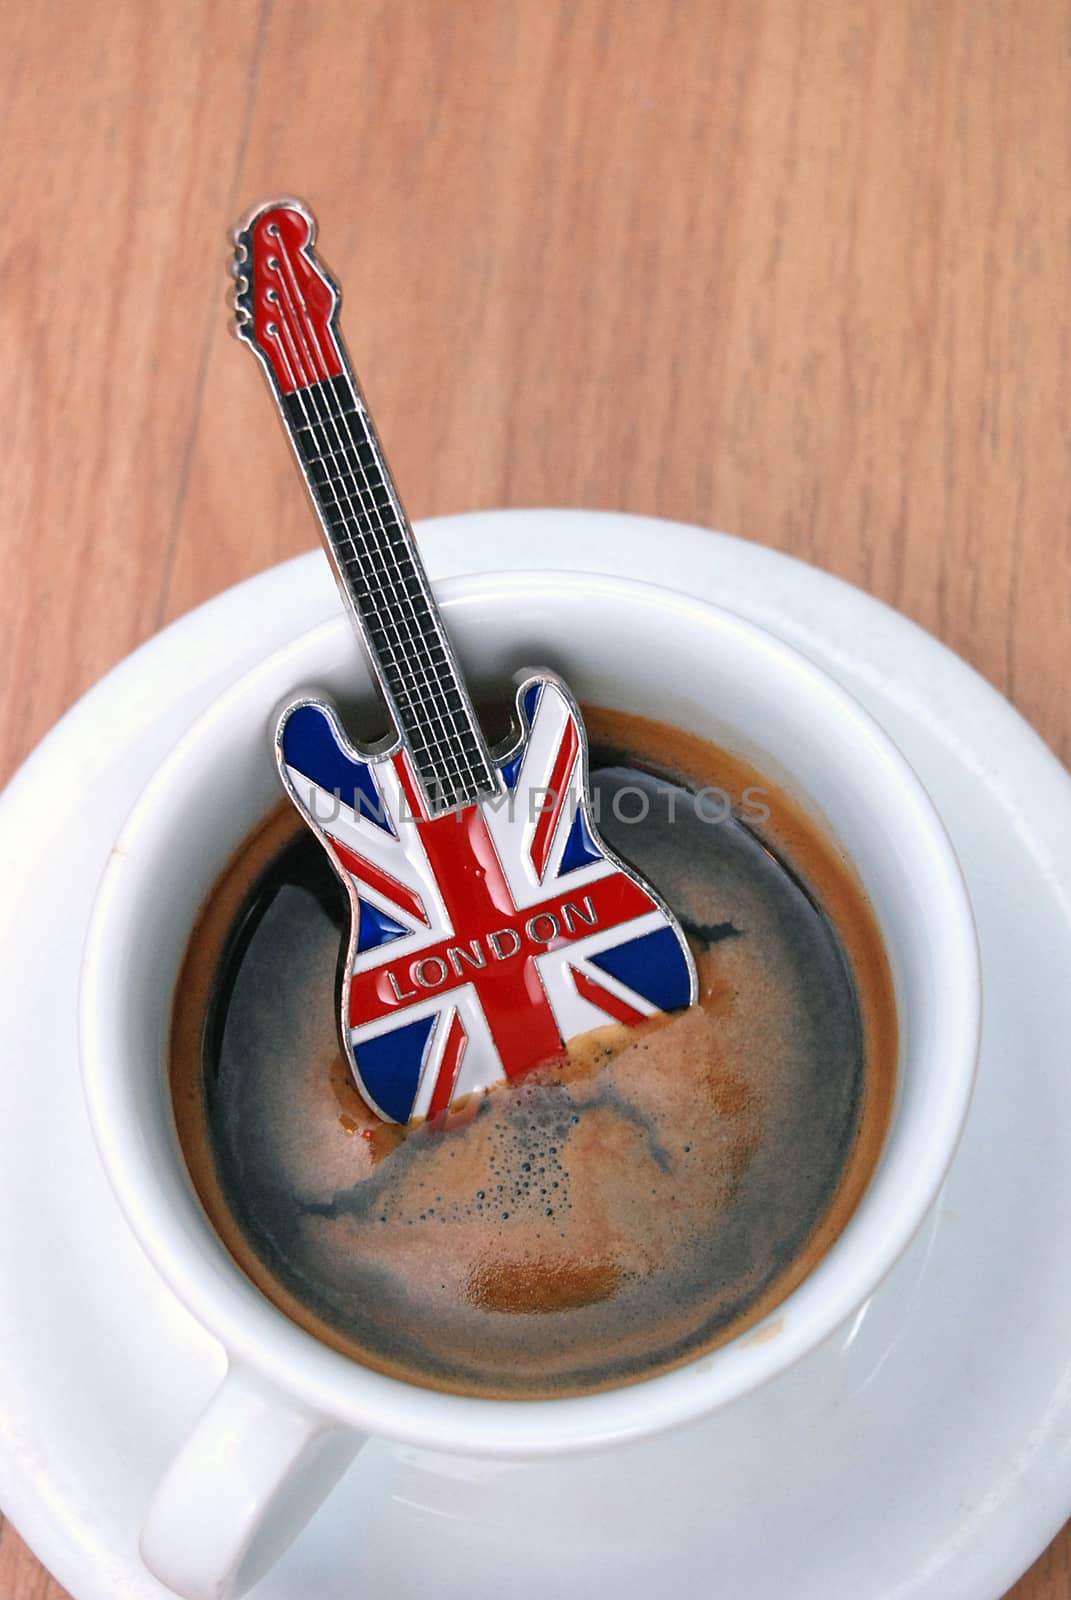 image of guitar souvenir from london in espresso cup